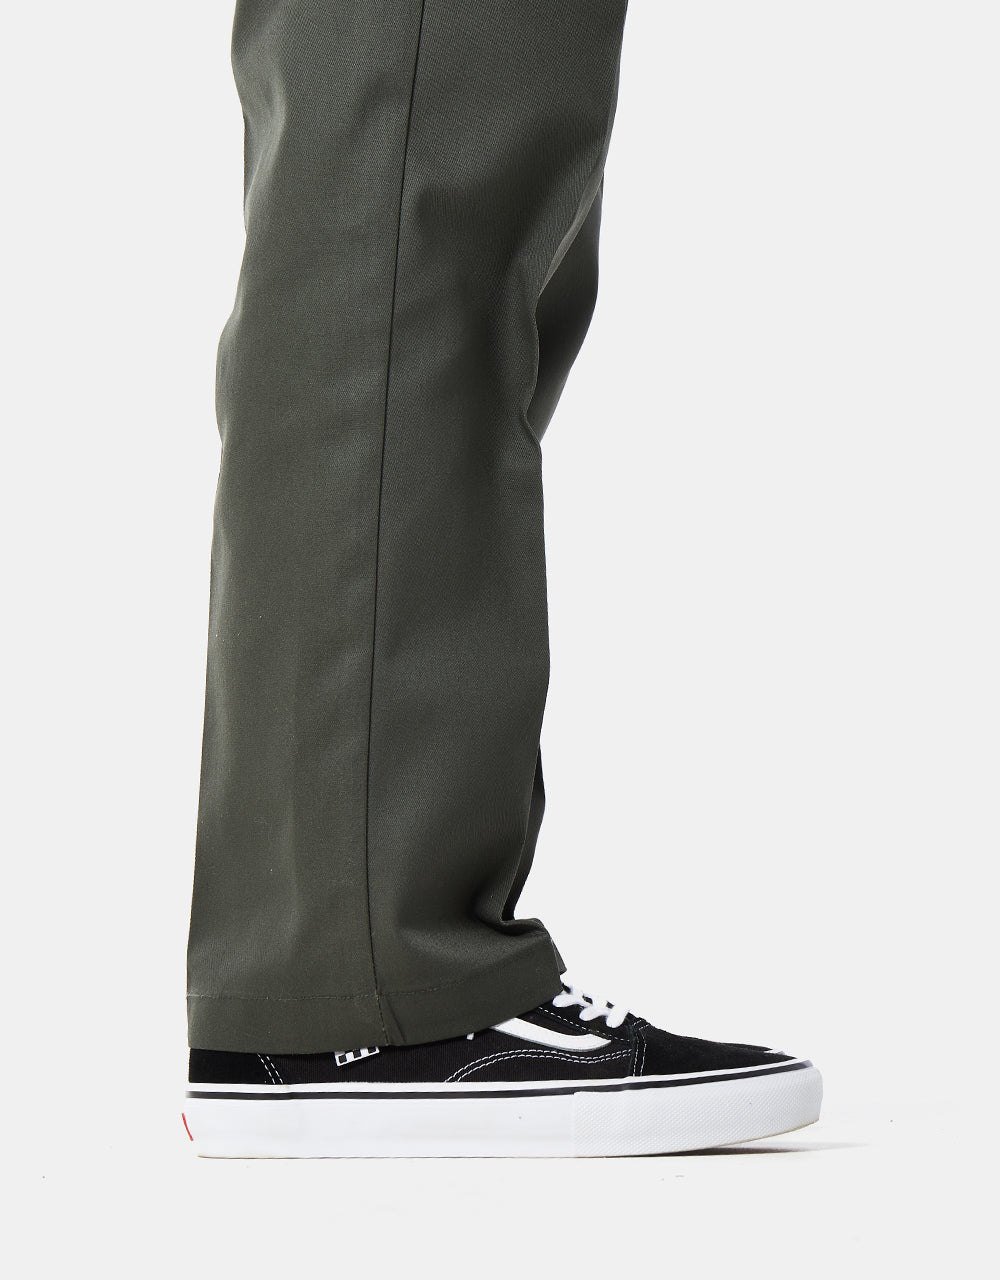 Dickies 874 Recycled Work Pant - Olive Green